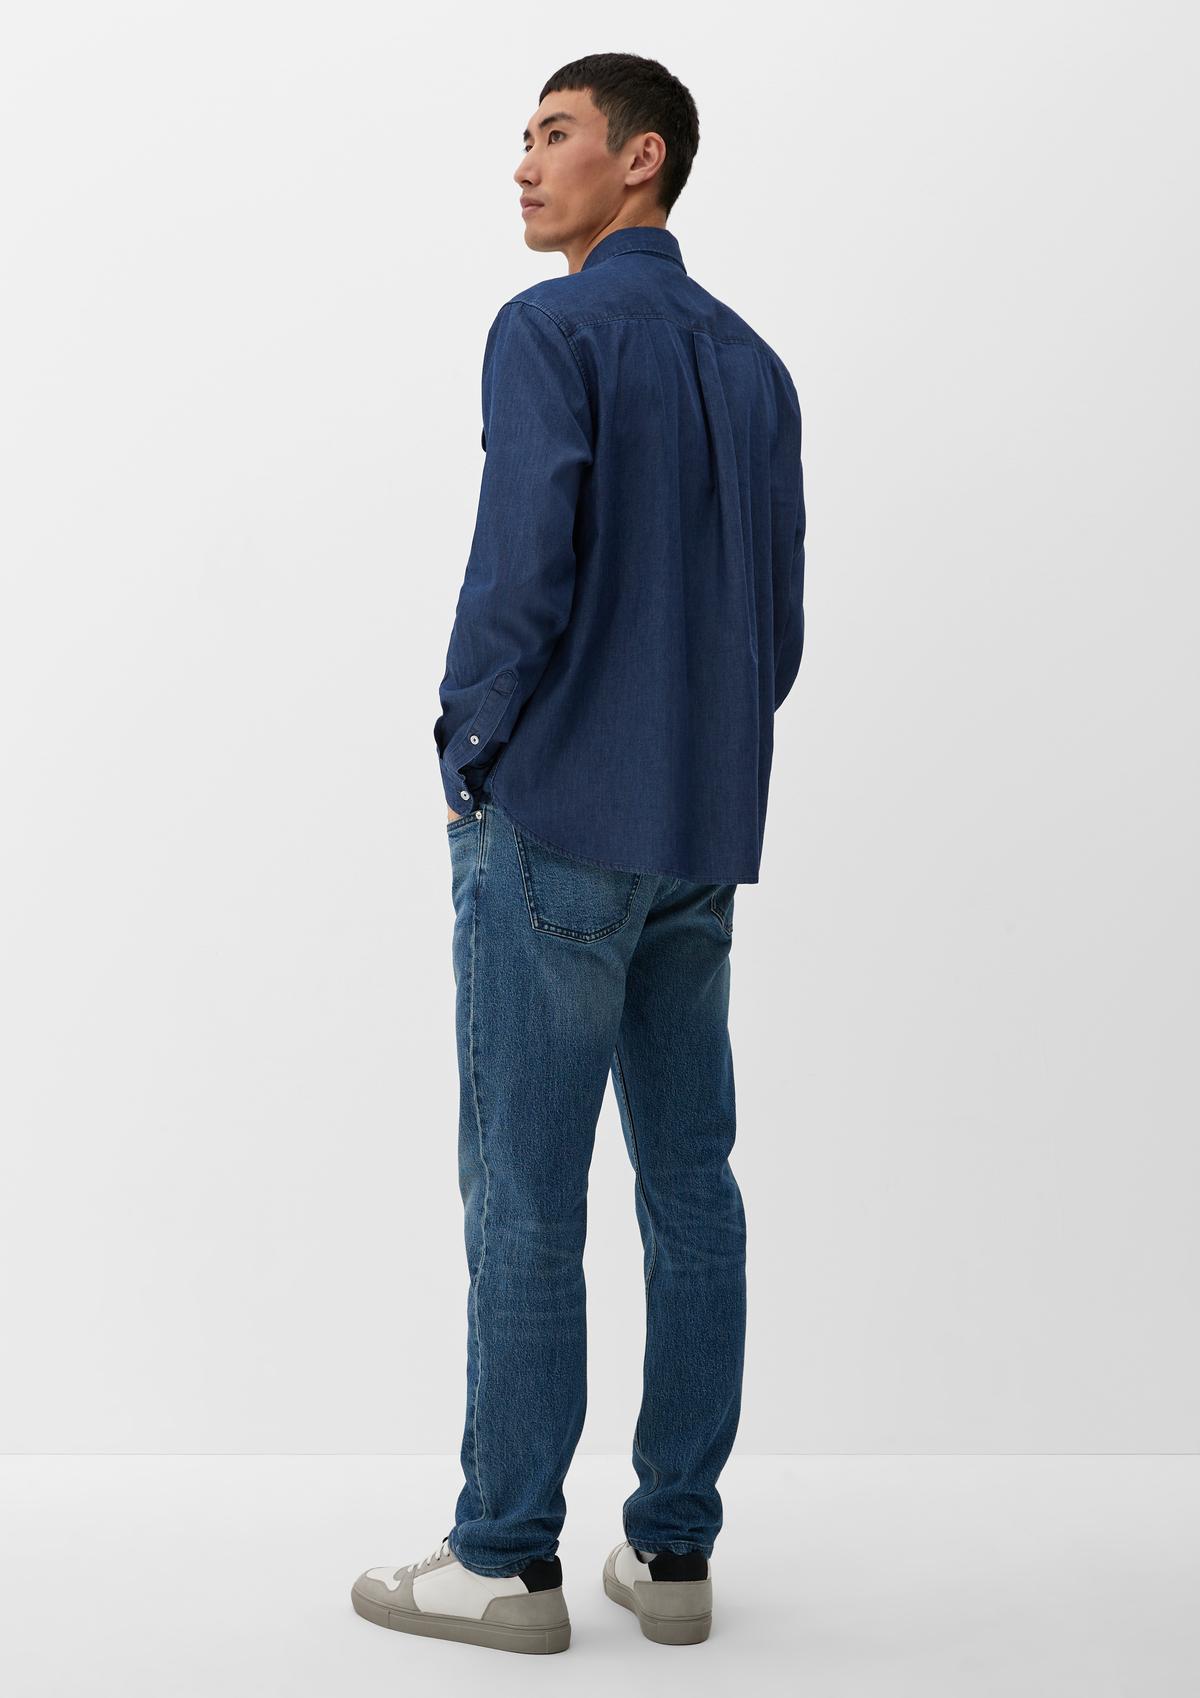 s.Oliver Regular fit: denim shirt with a button-down collar